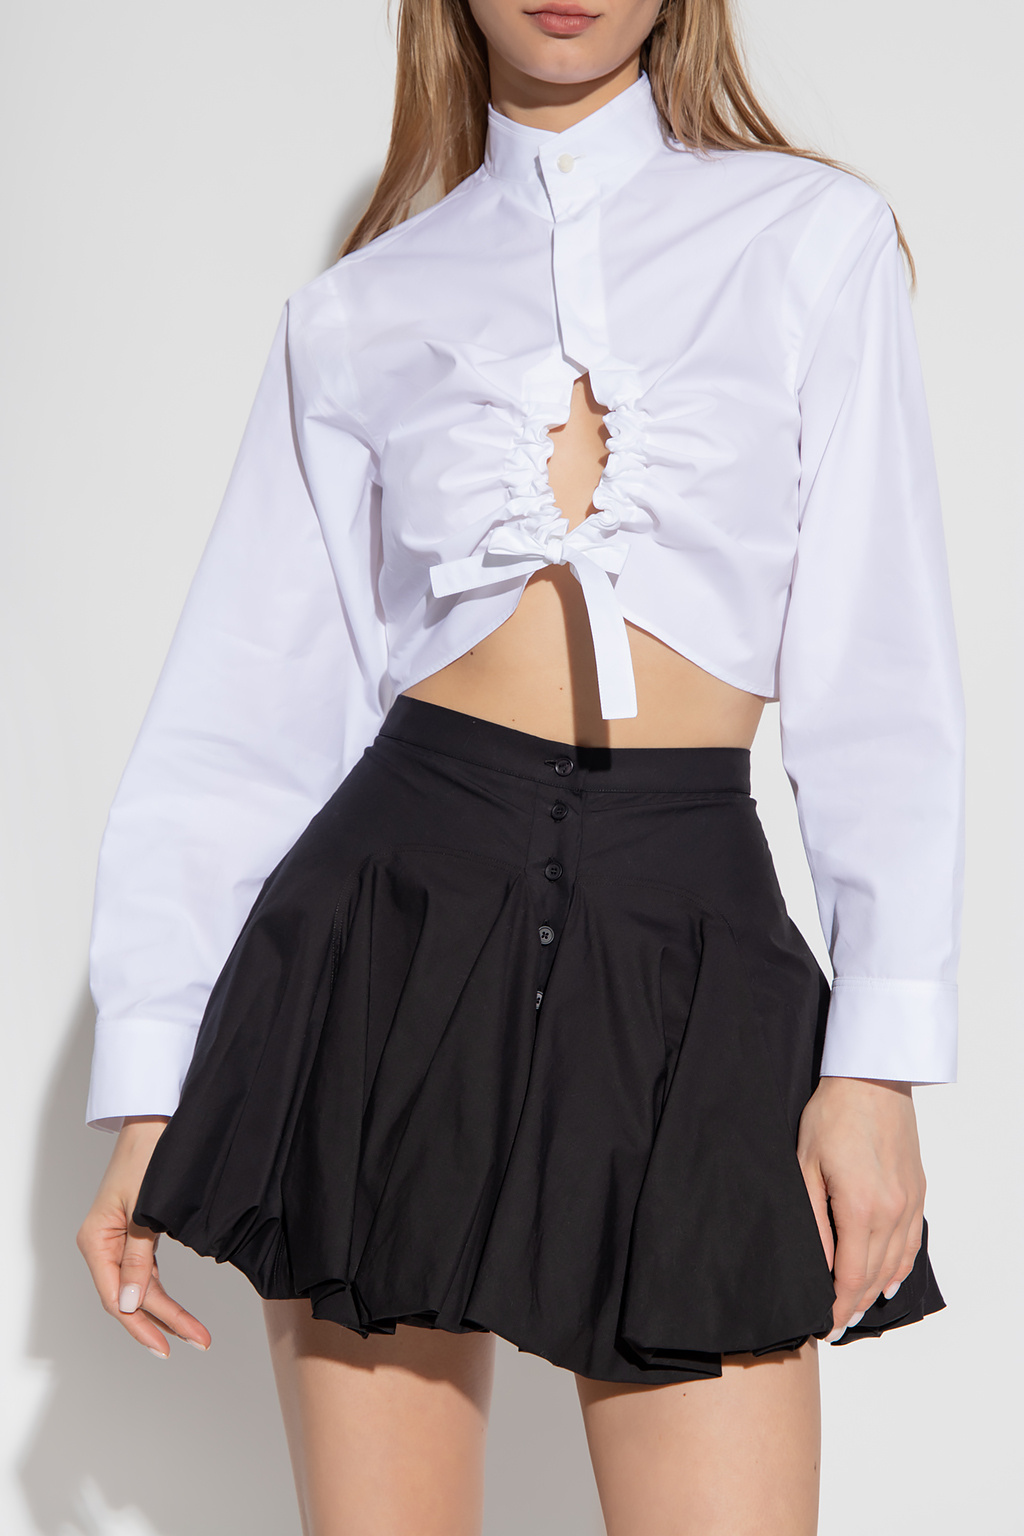 Alaïa Cropped shirt with stand collar